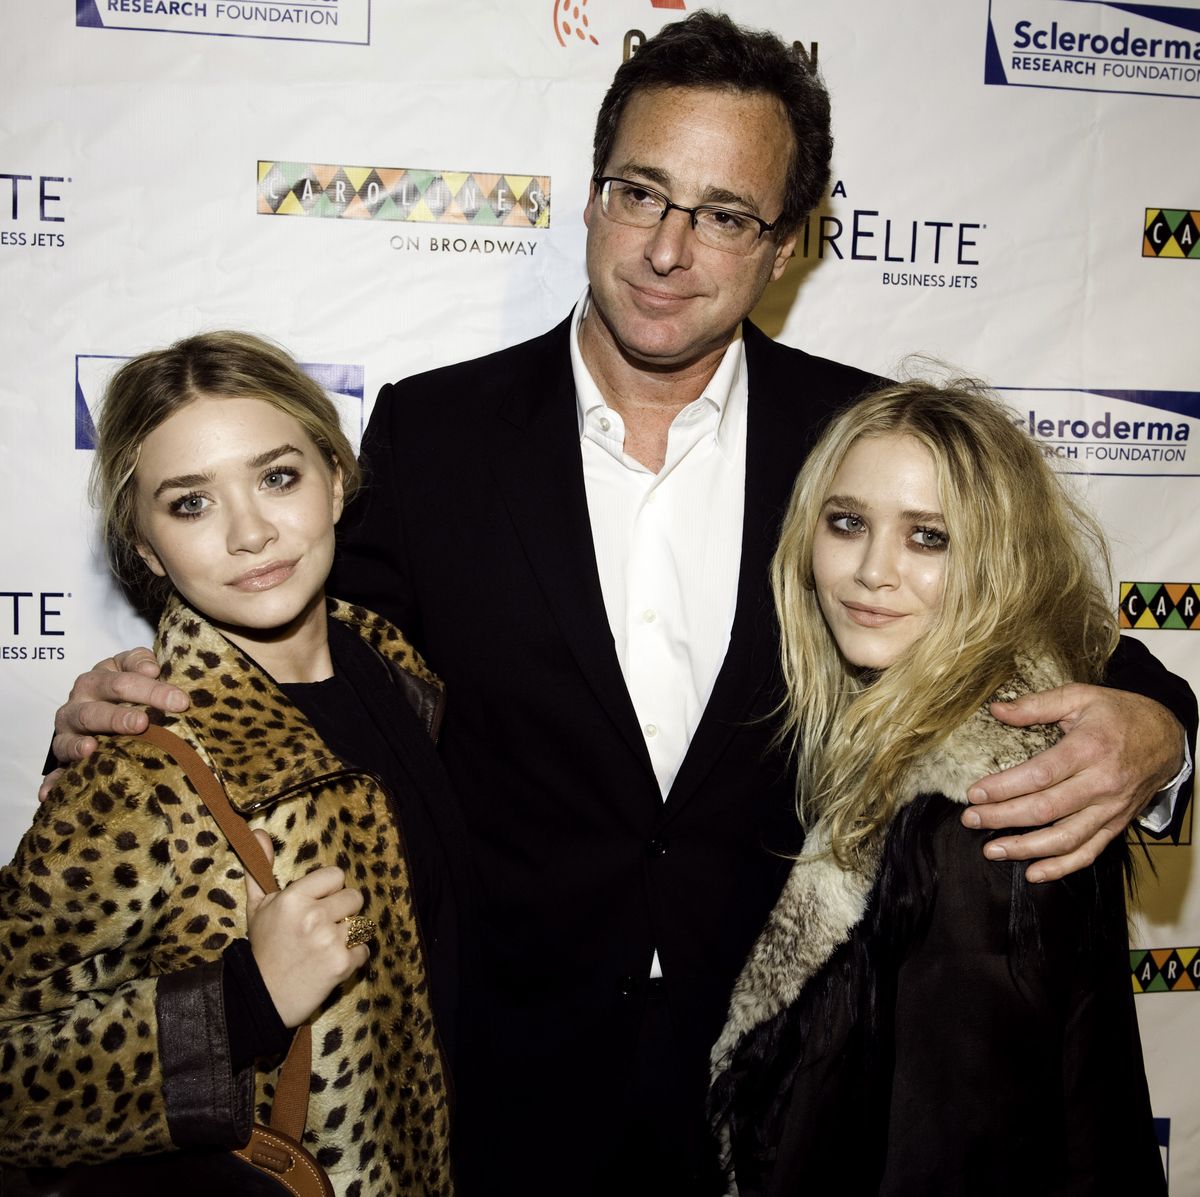 new york   november 09actress mary kate olsen, comedian bob saget and ashley olsen attend cool comedy hot cuisine 2009 benefiting the scleroderma research foundation at carolines on broadway on november 9, 2009 in new york city  photo by shawn ehlerswireimage for scleroderma research foundation